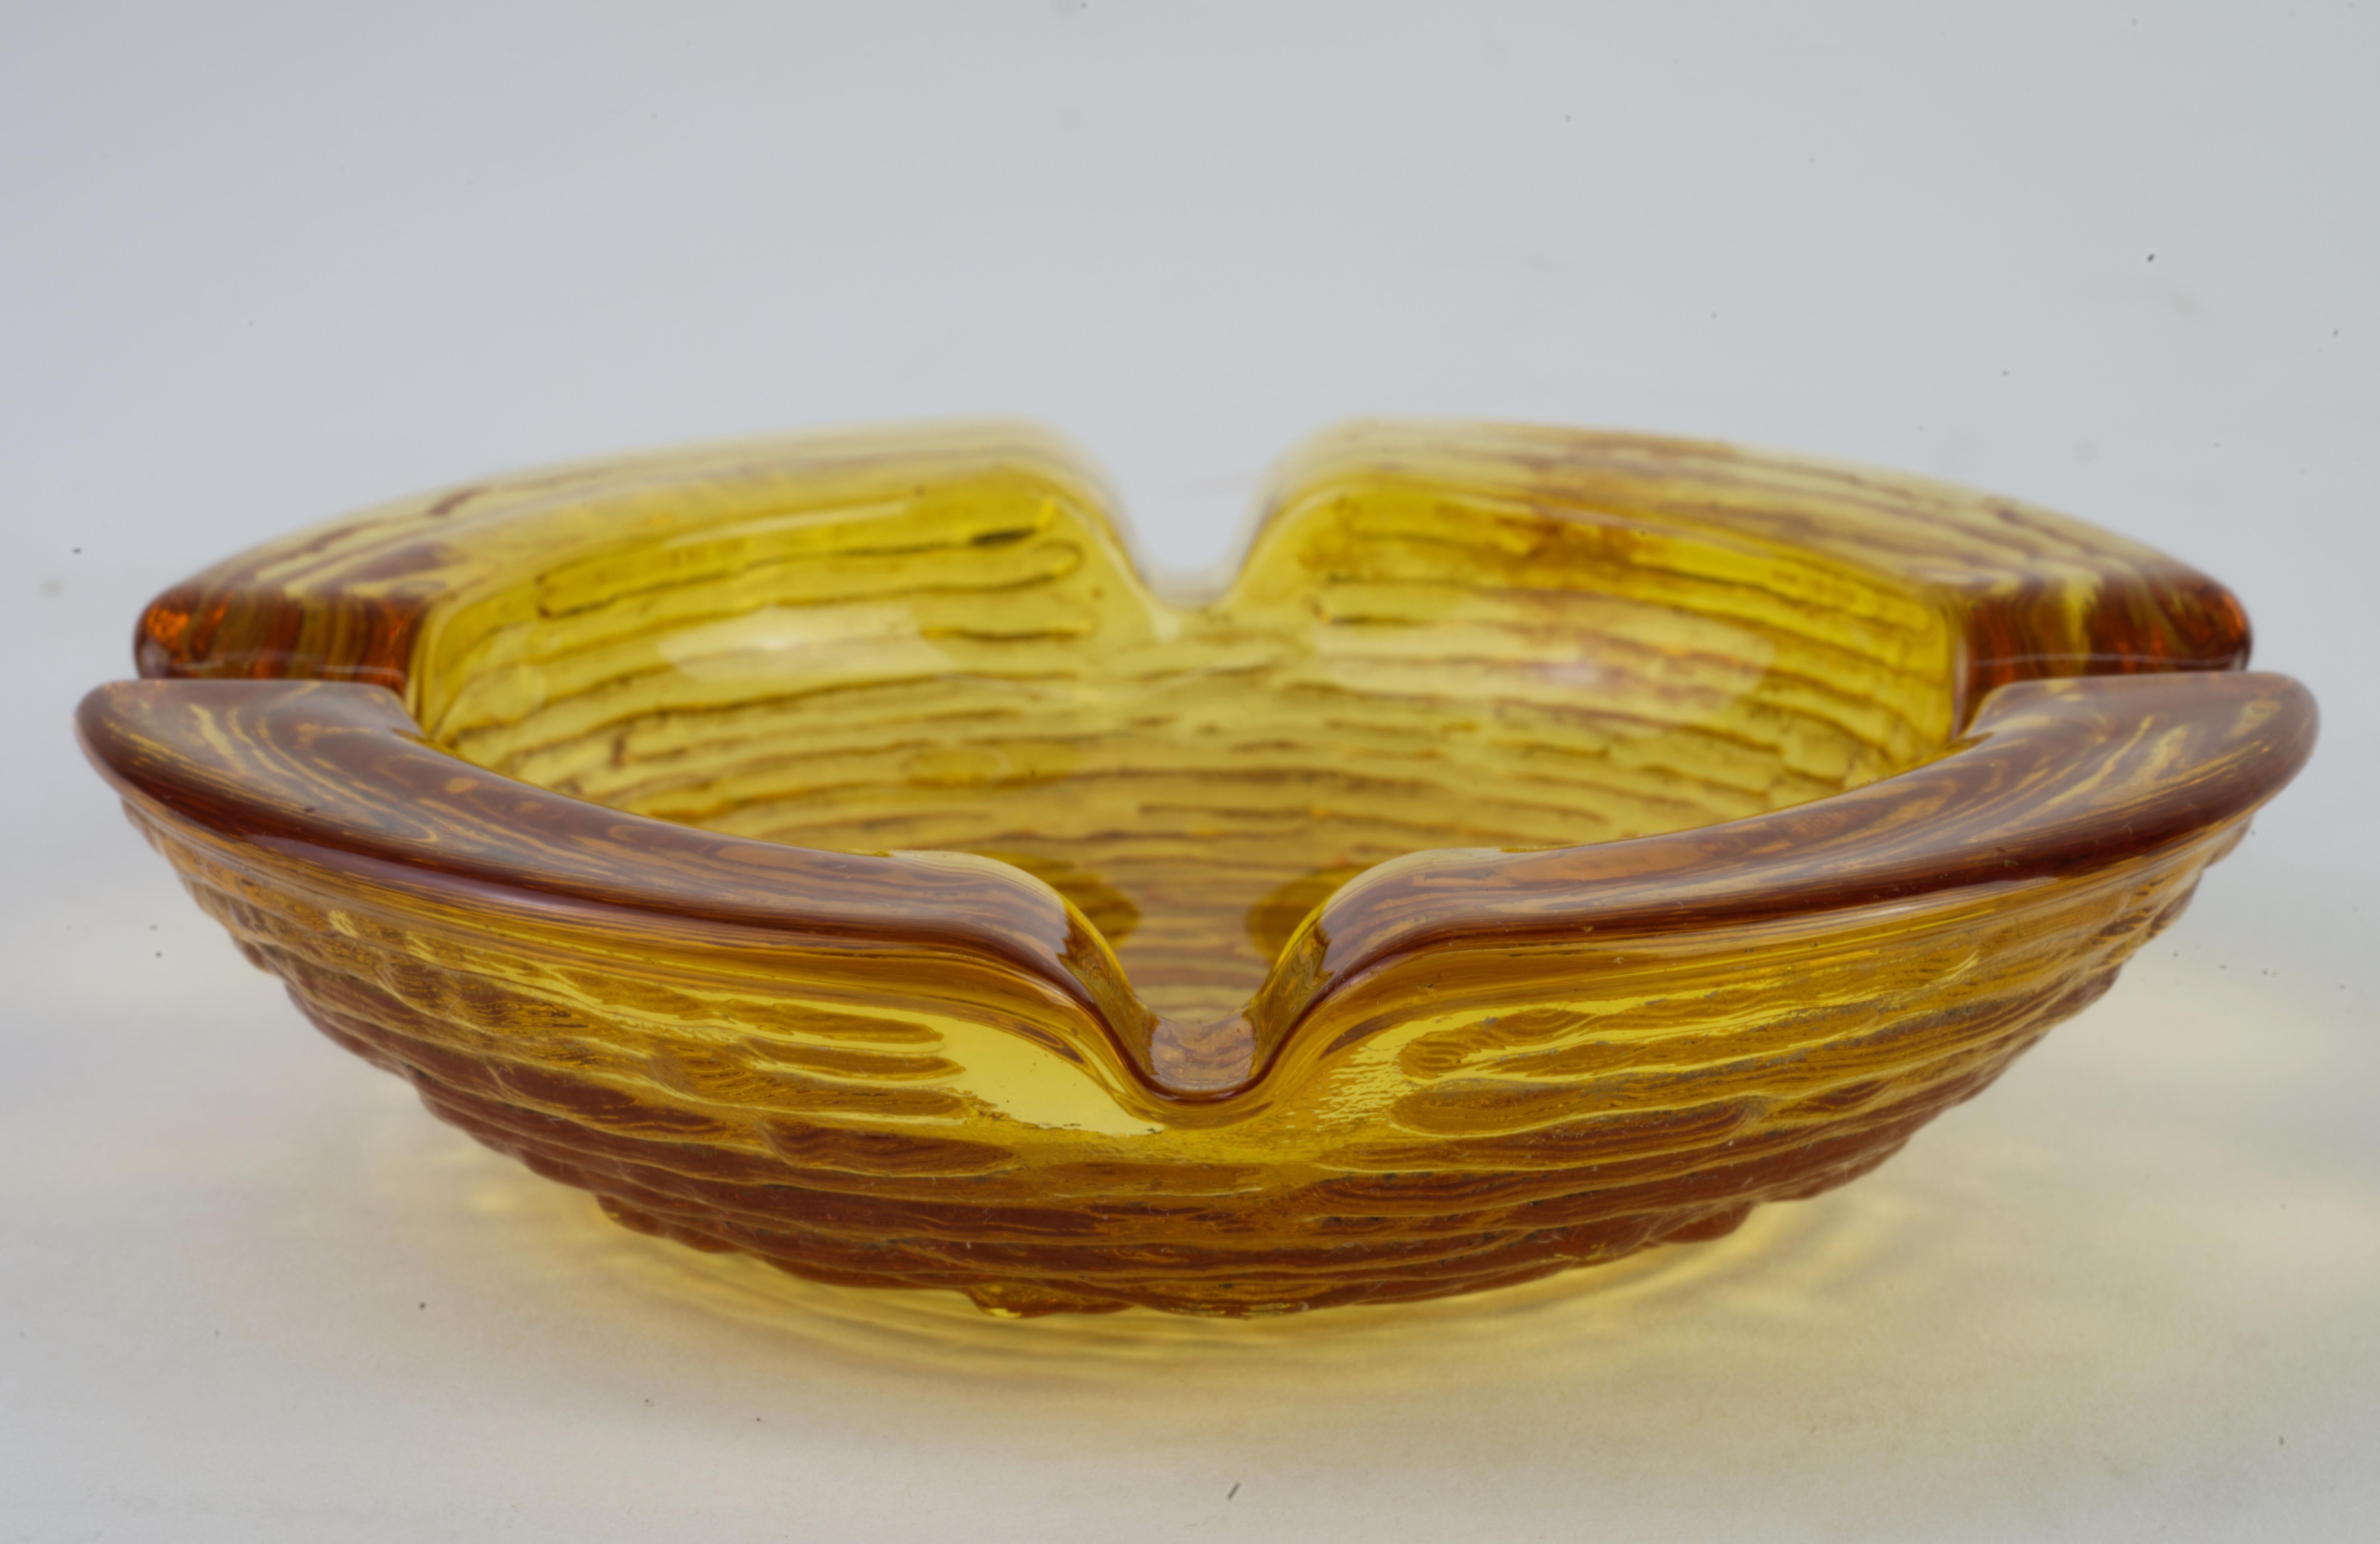 Anchor Hocking Soreno Textured Amber Glass Ashtray Vintage American In Good Condition For Sale In Clifton Springs, NY